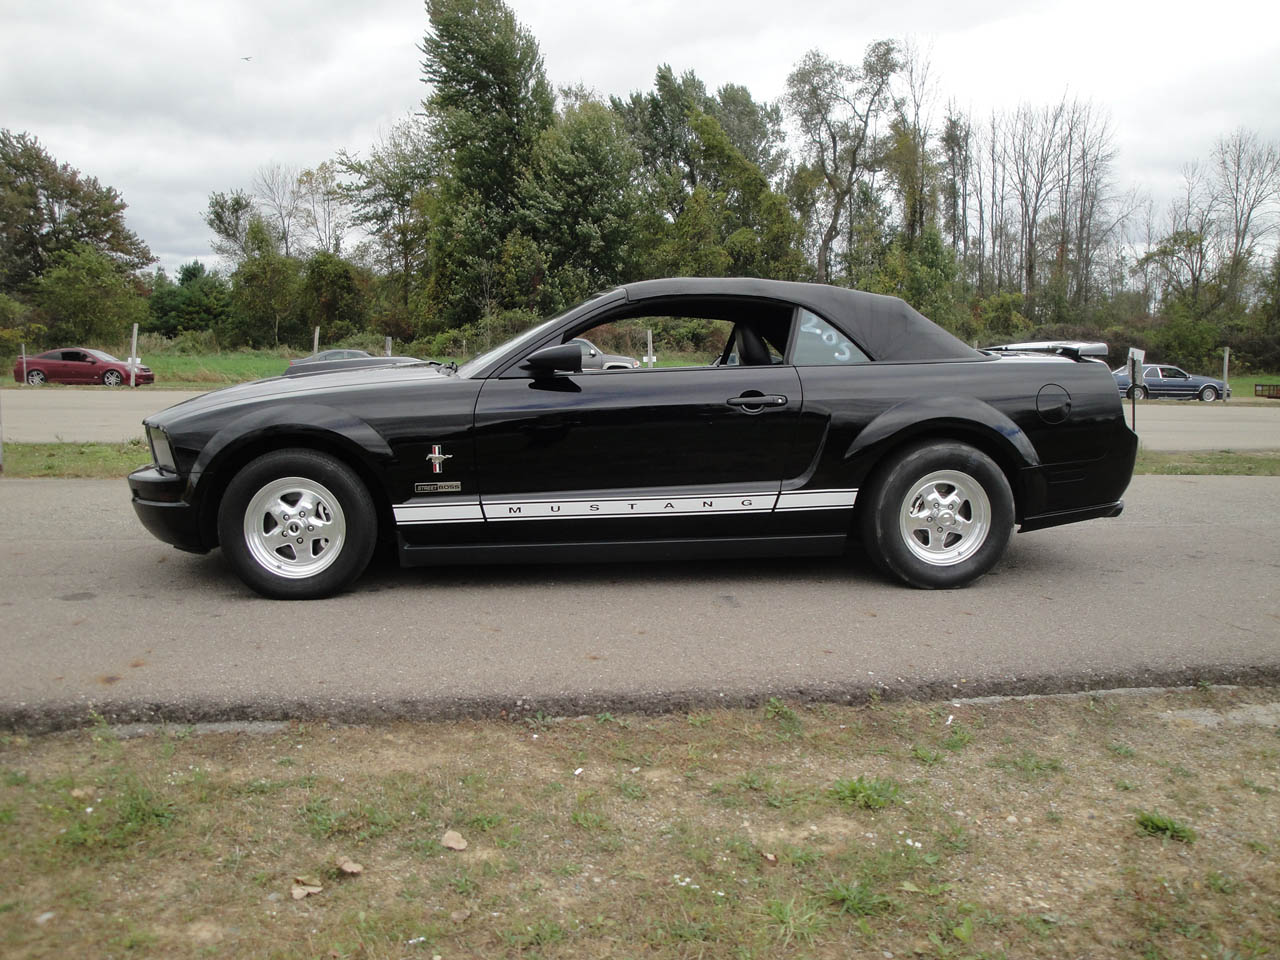  2006 Ford Mustang Pony convertible